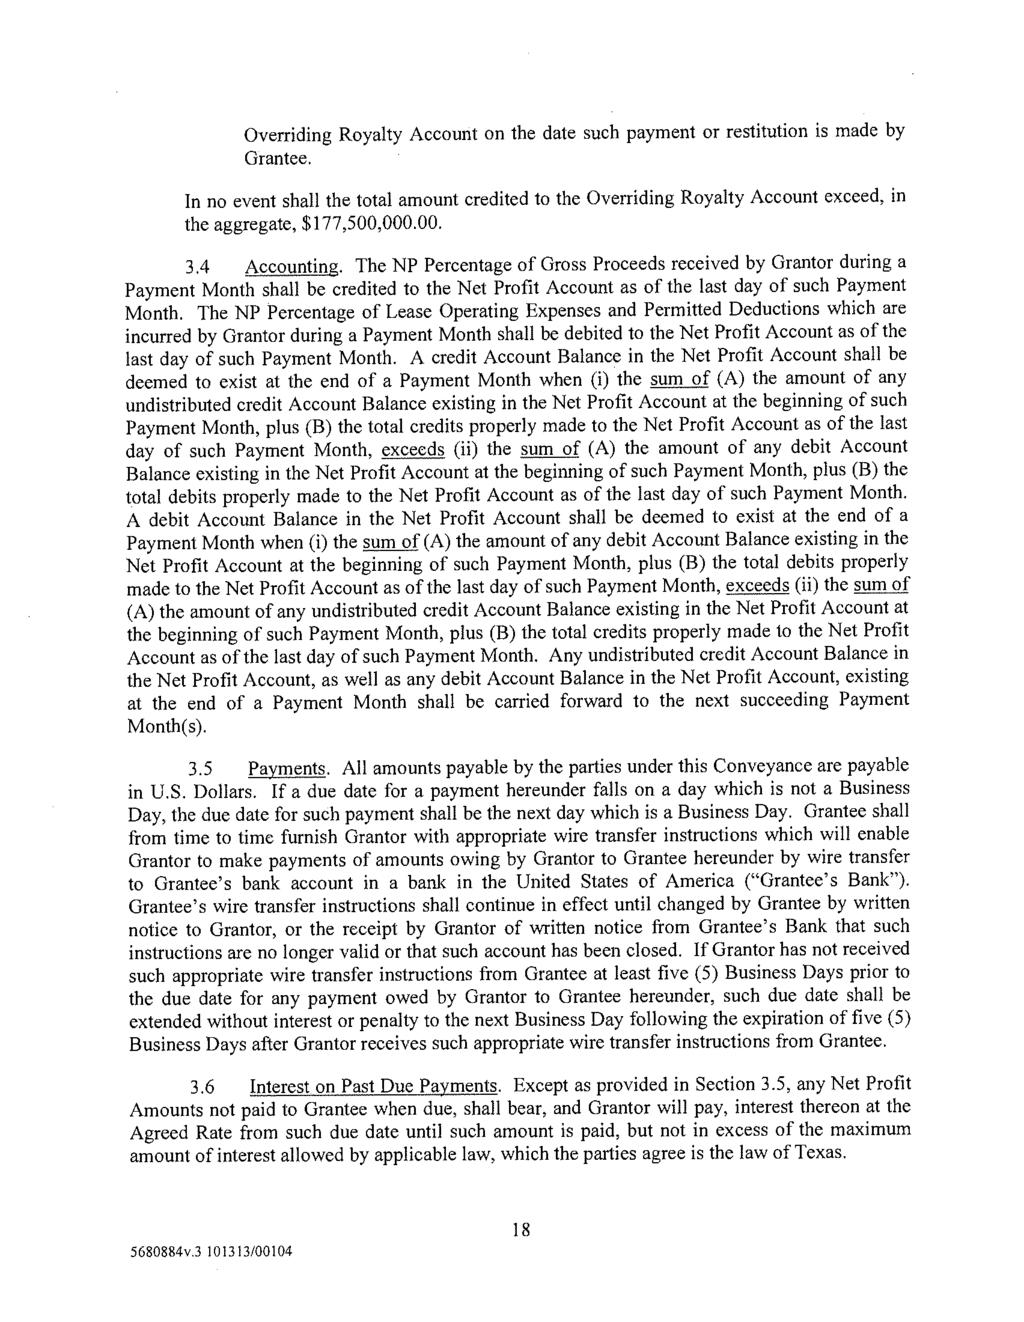 Case 12-36187 Document 52-4 Filed